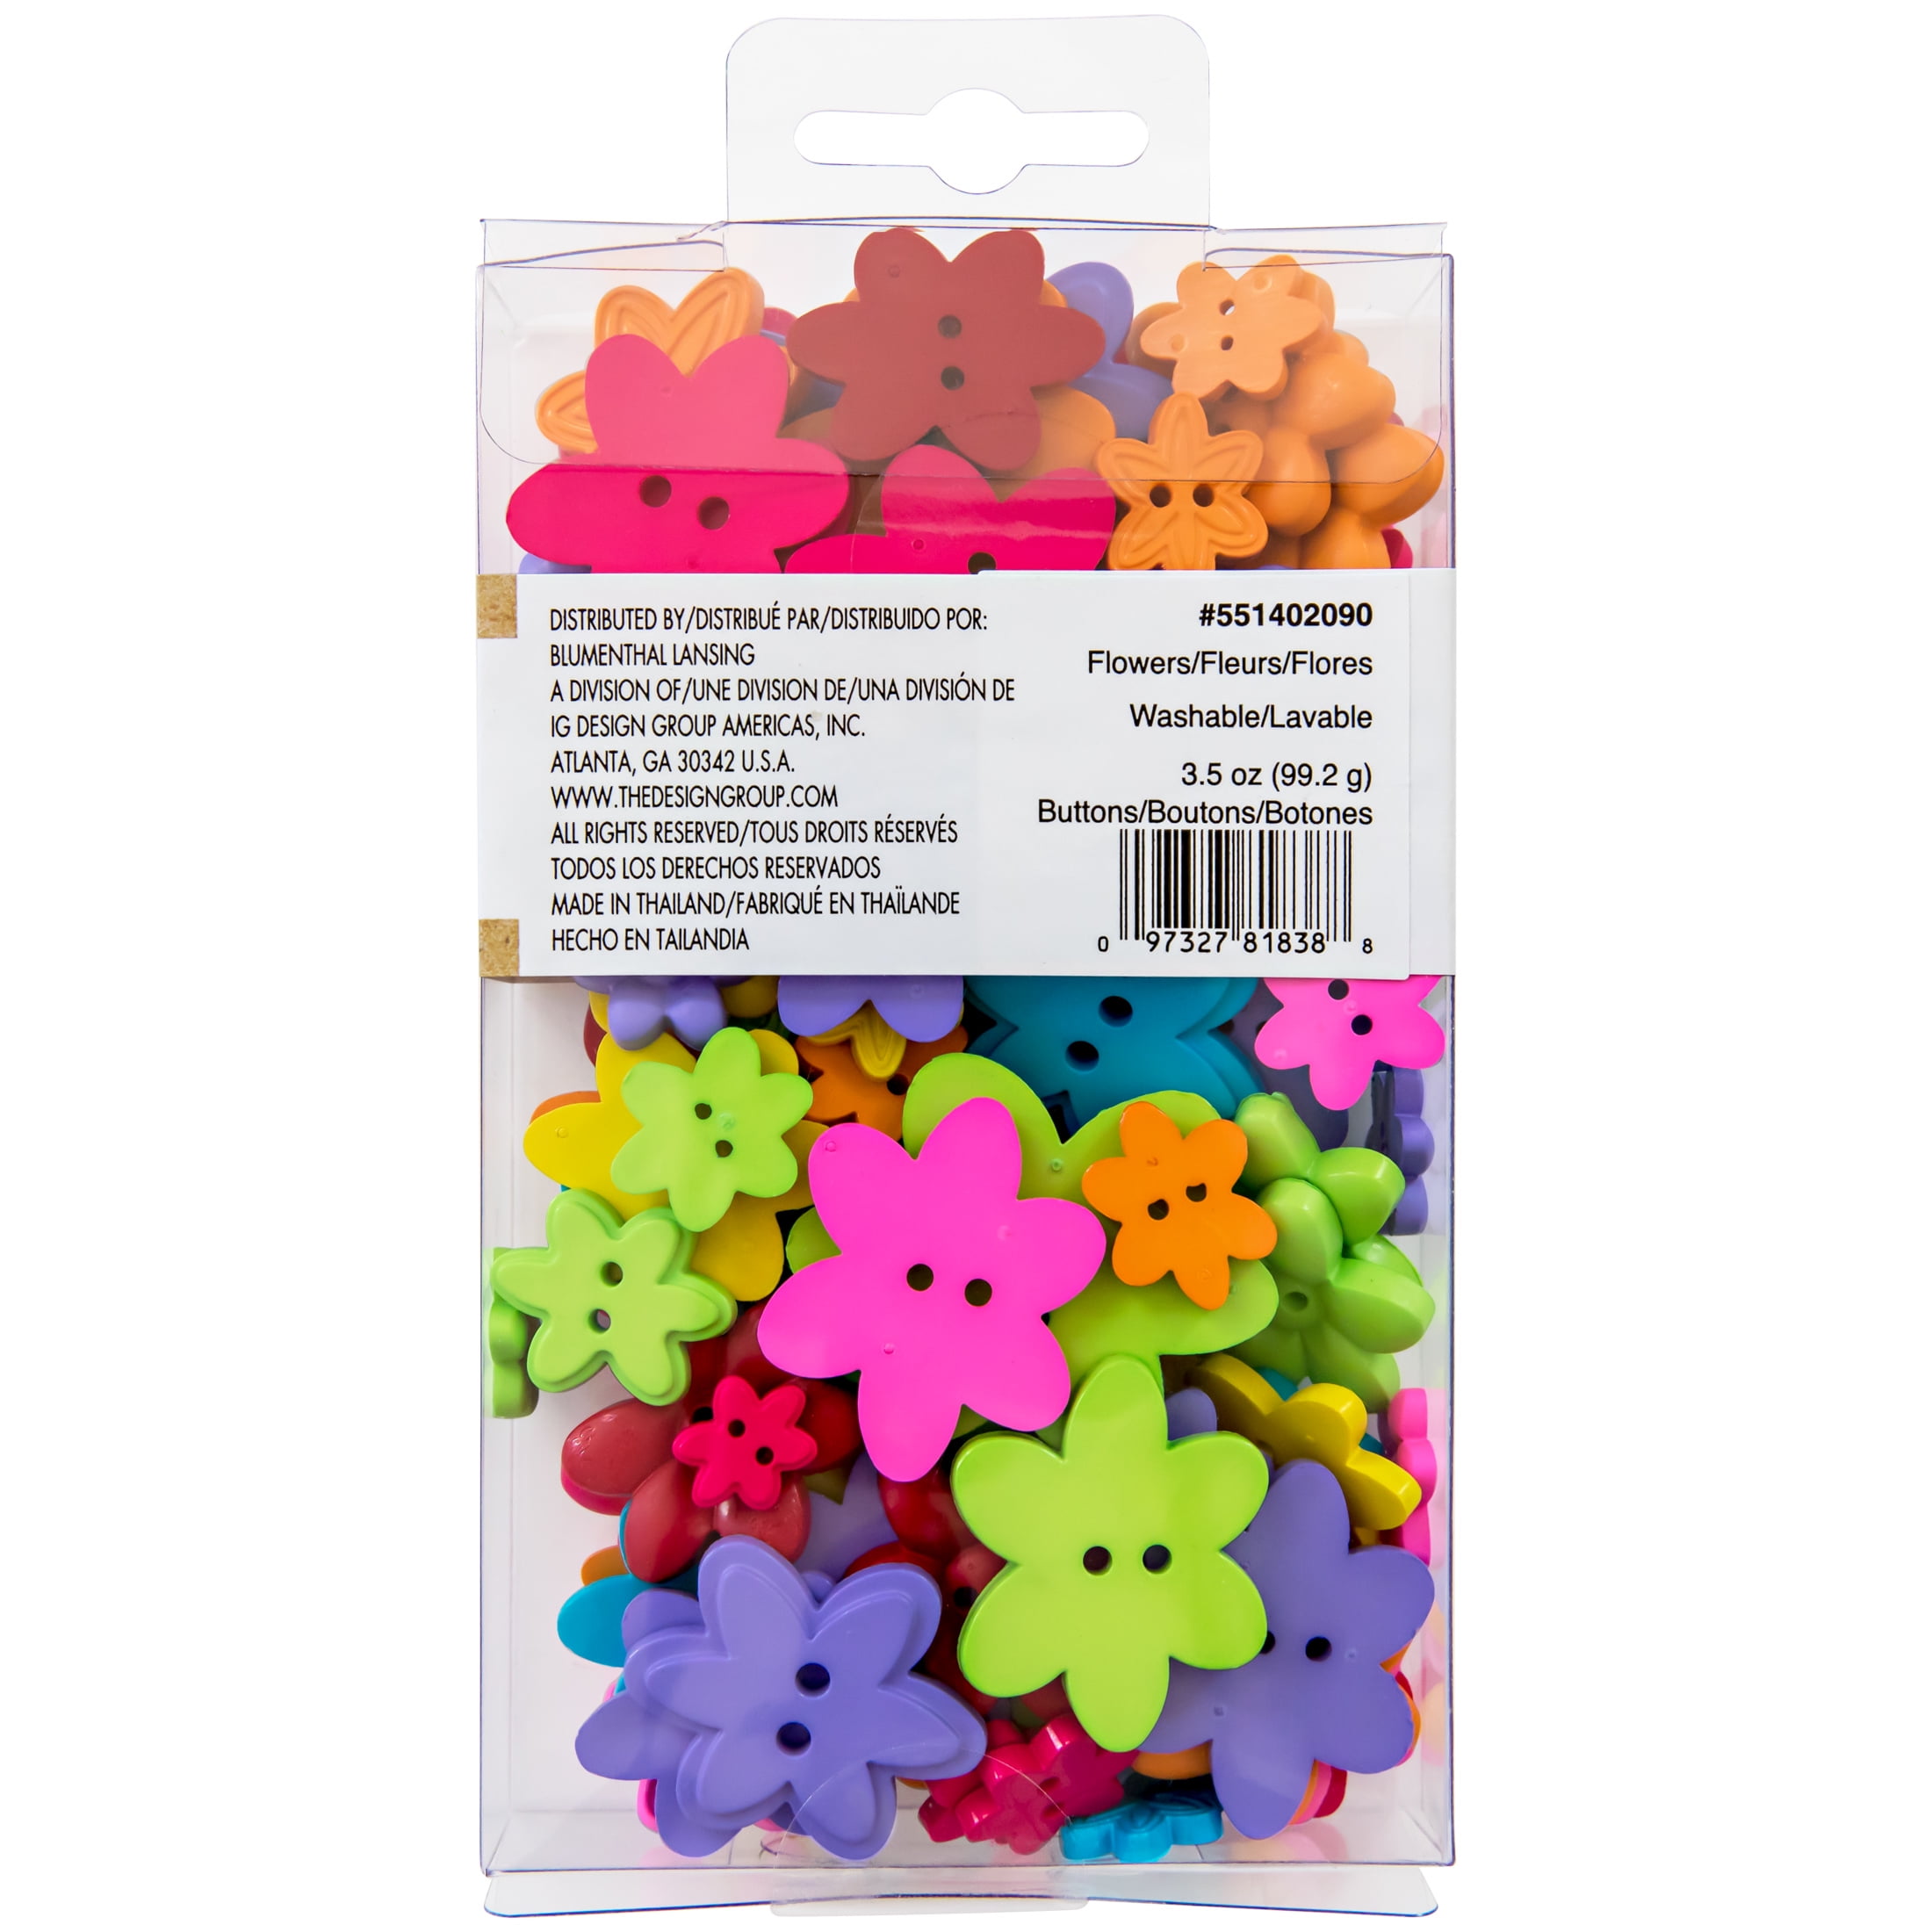 Favorite Findings Flower Print Buttons By Loops & Threads®